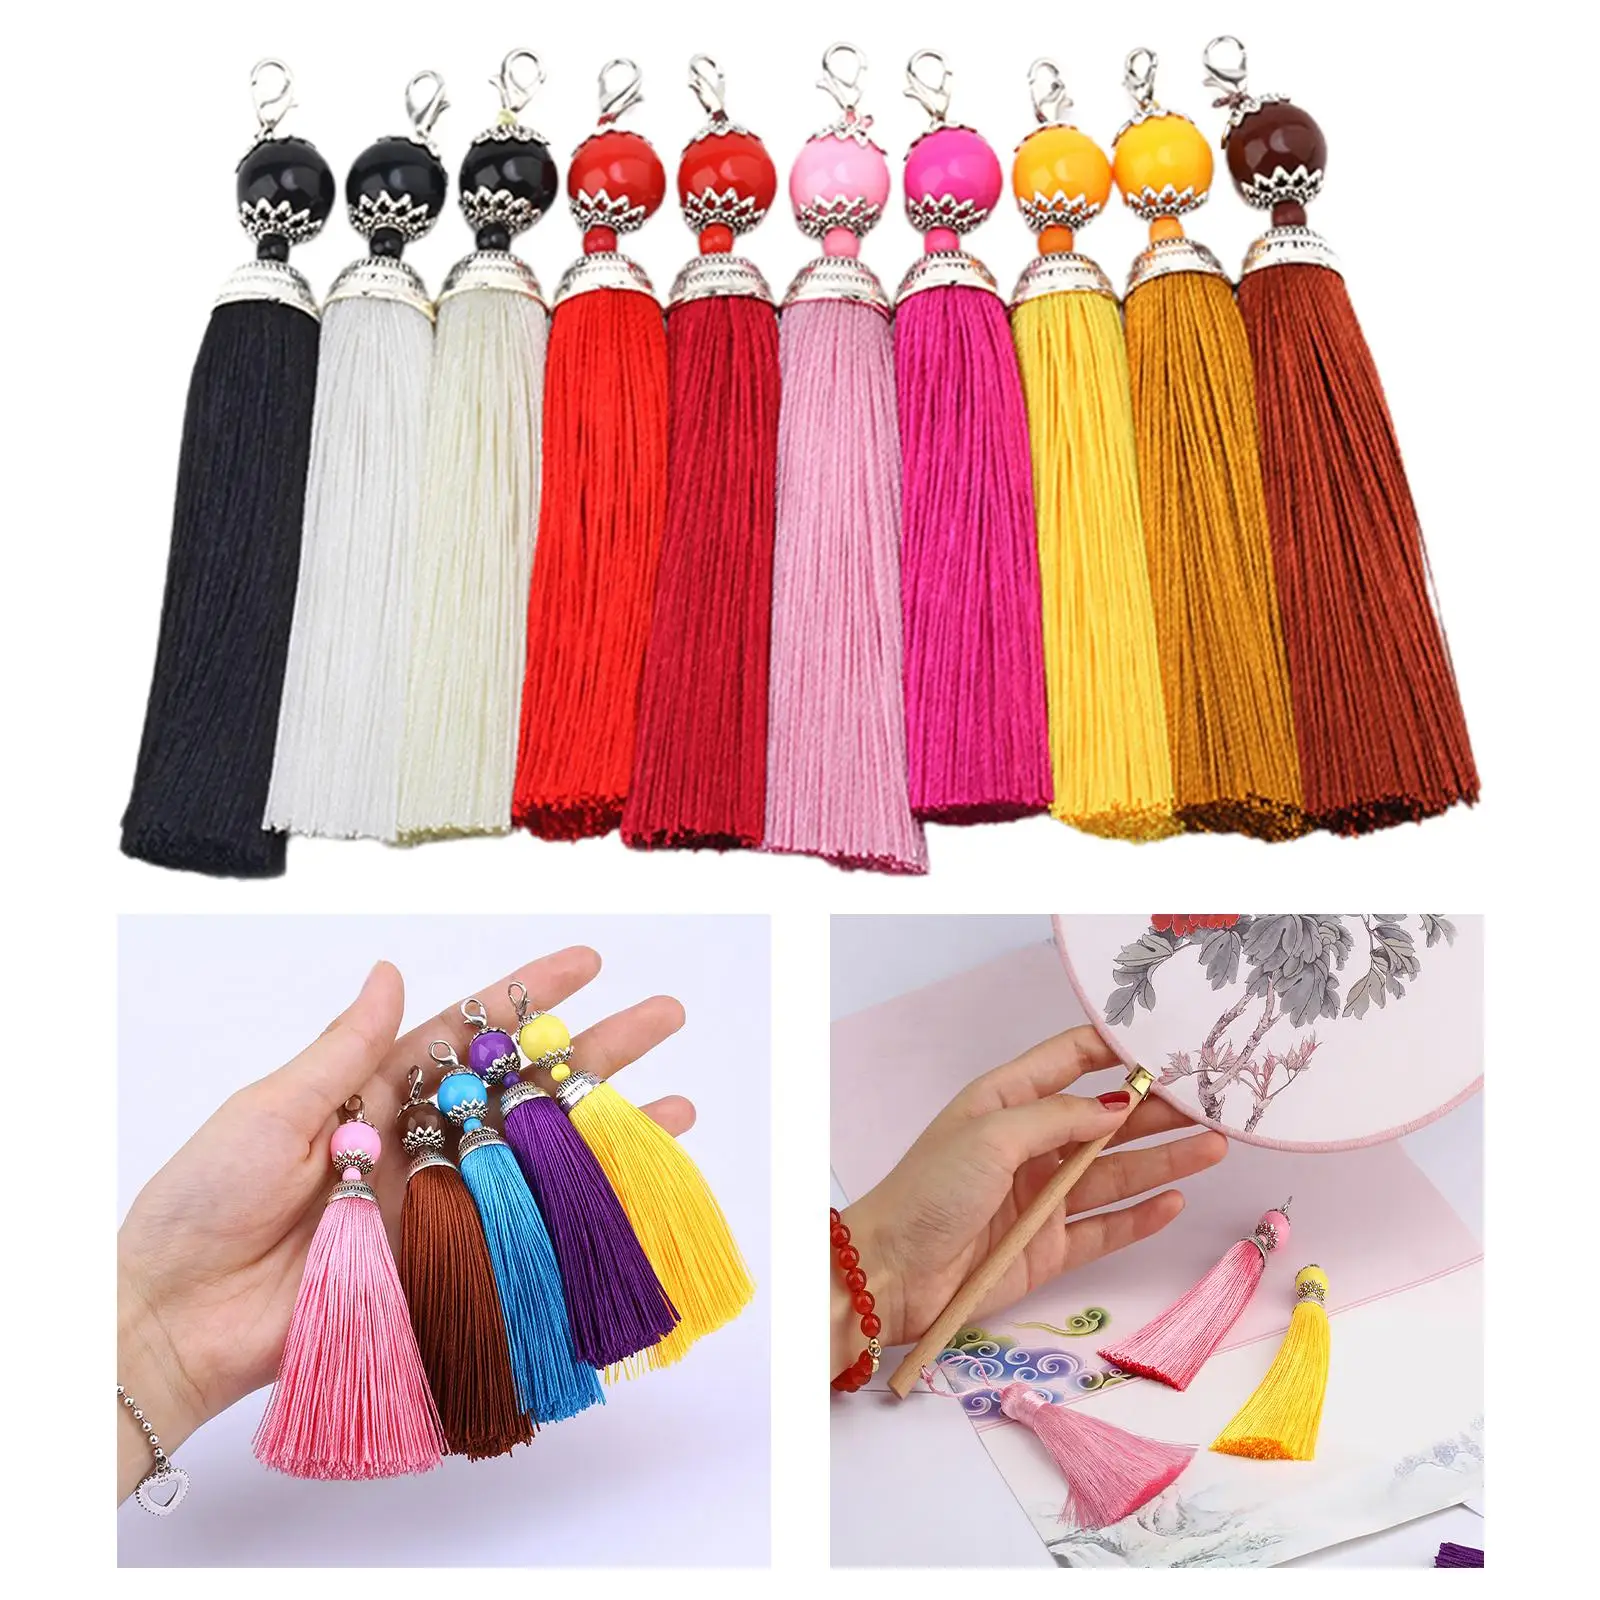 10 Pieces Tassels for Jewelry Making, Keychain Tassel Charms for Keychain DIY Craft